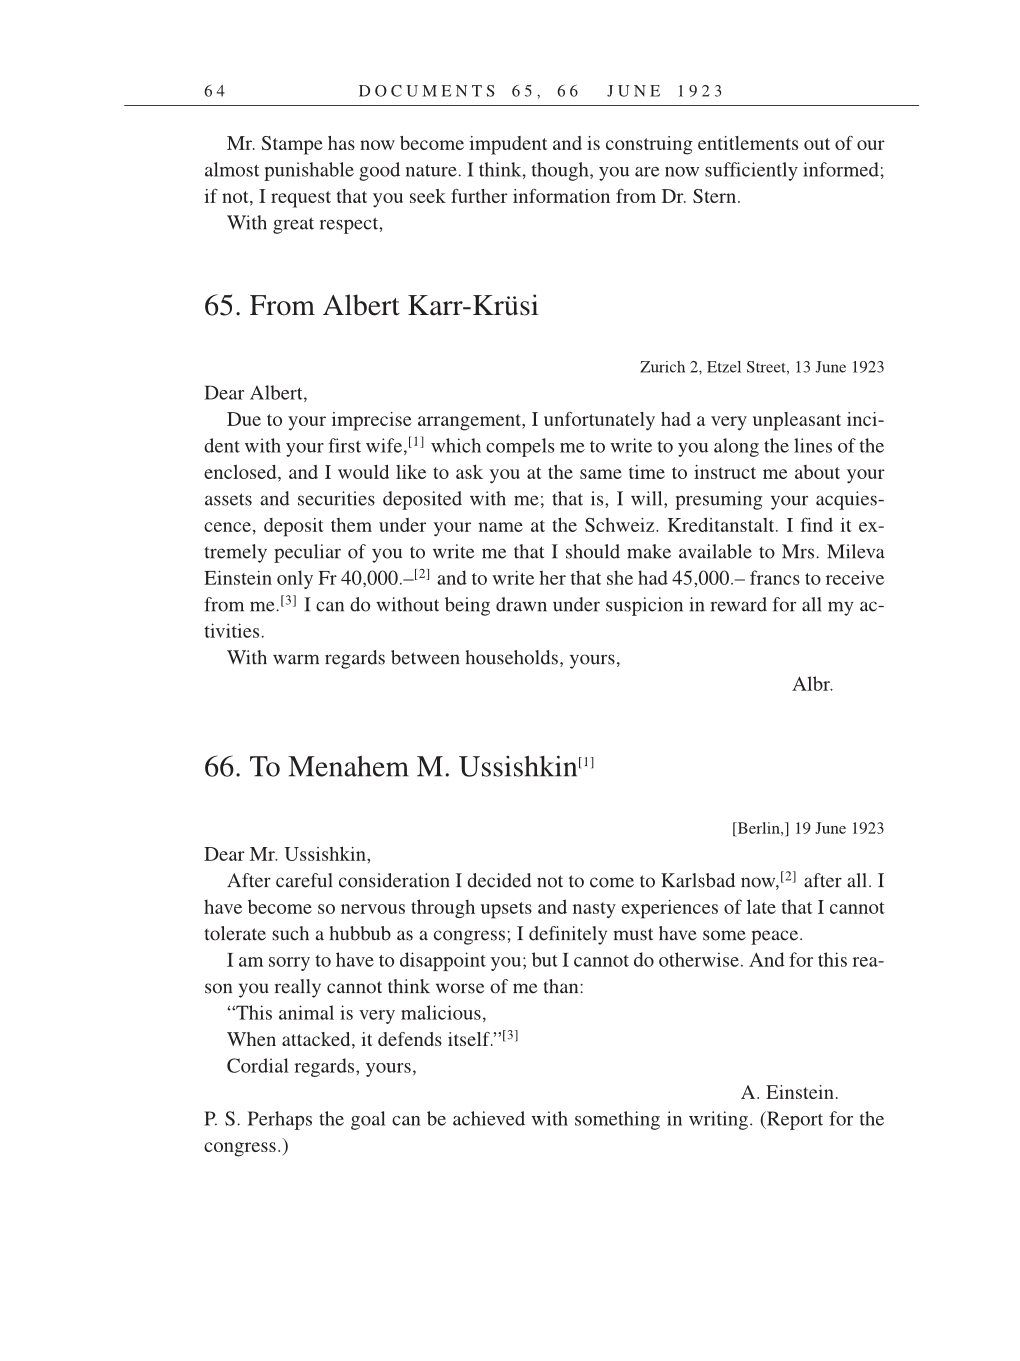 Volume 14: The Berlin Years: Writings & Correspondence, April 1923-May 1925 (English Translation Supplement) page 64